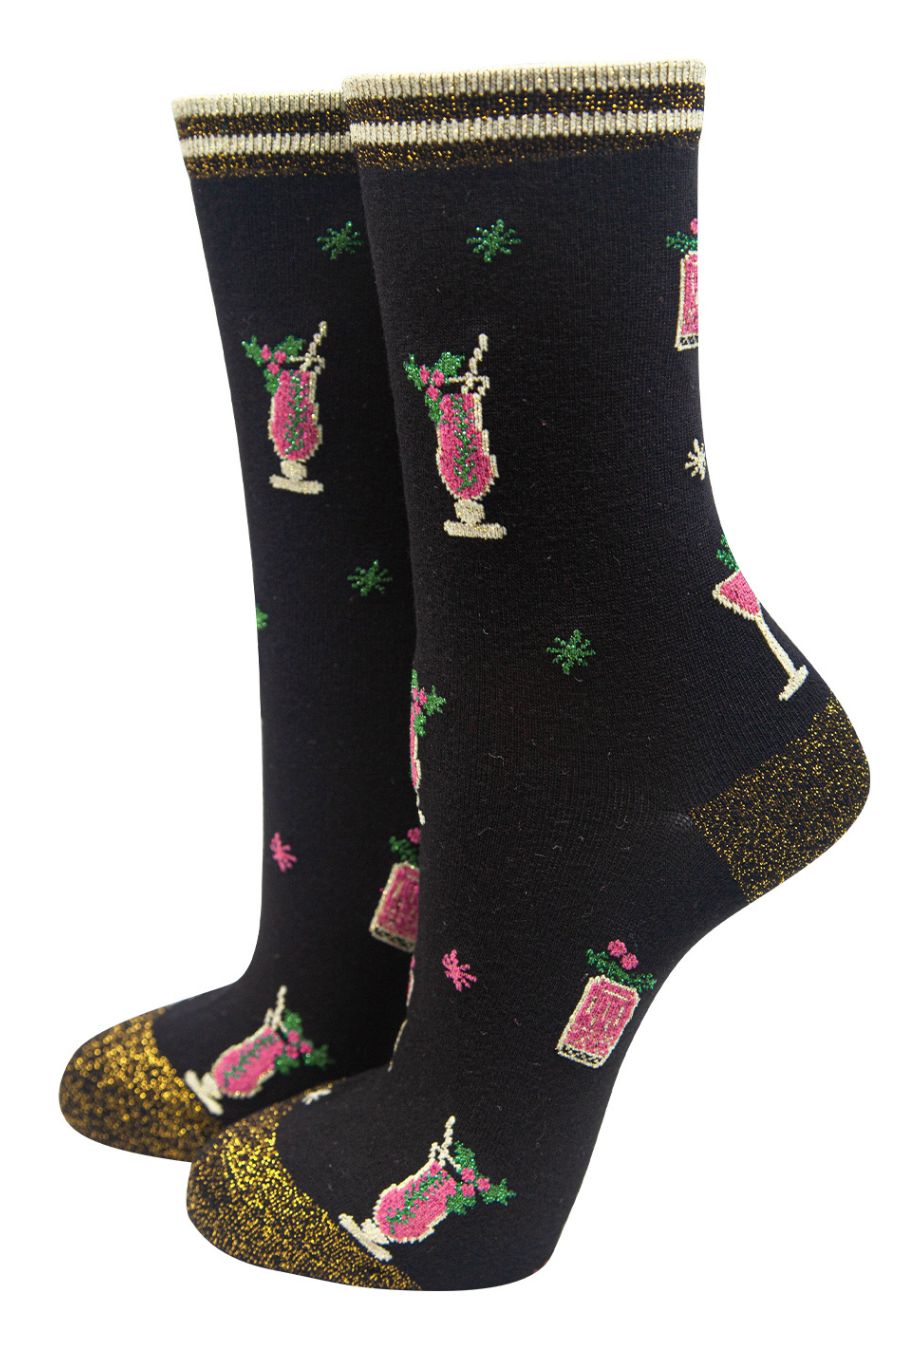 black and gold glitter ankle socks with a pink cocktail glass pattern